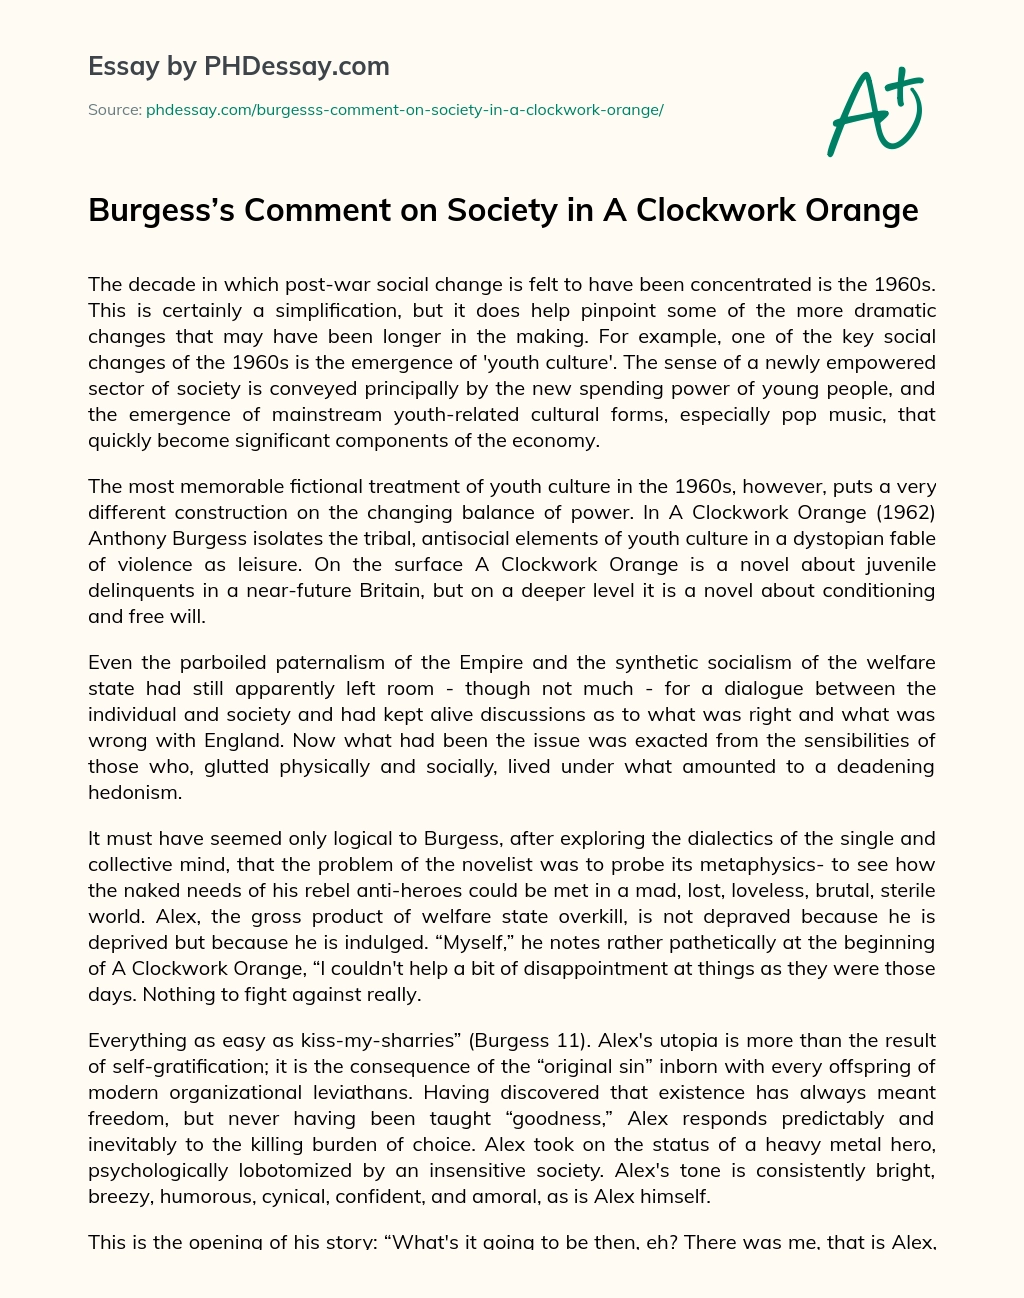 Burgess’s Comment on Society in A Clockwork Orange essay